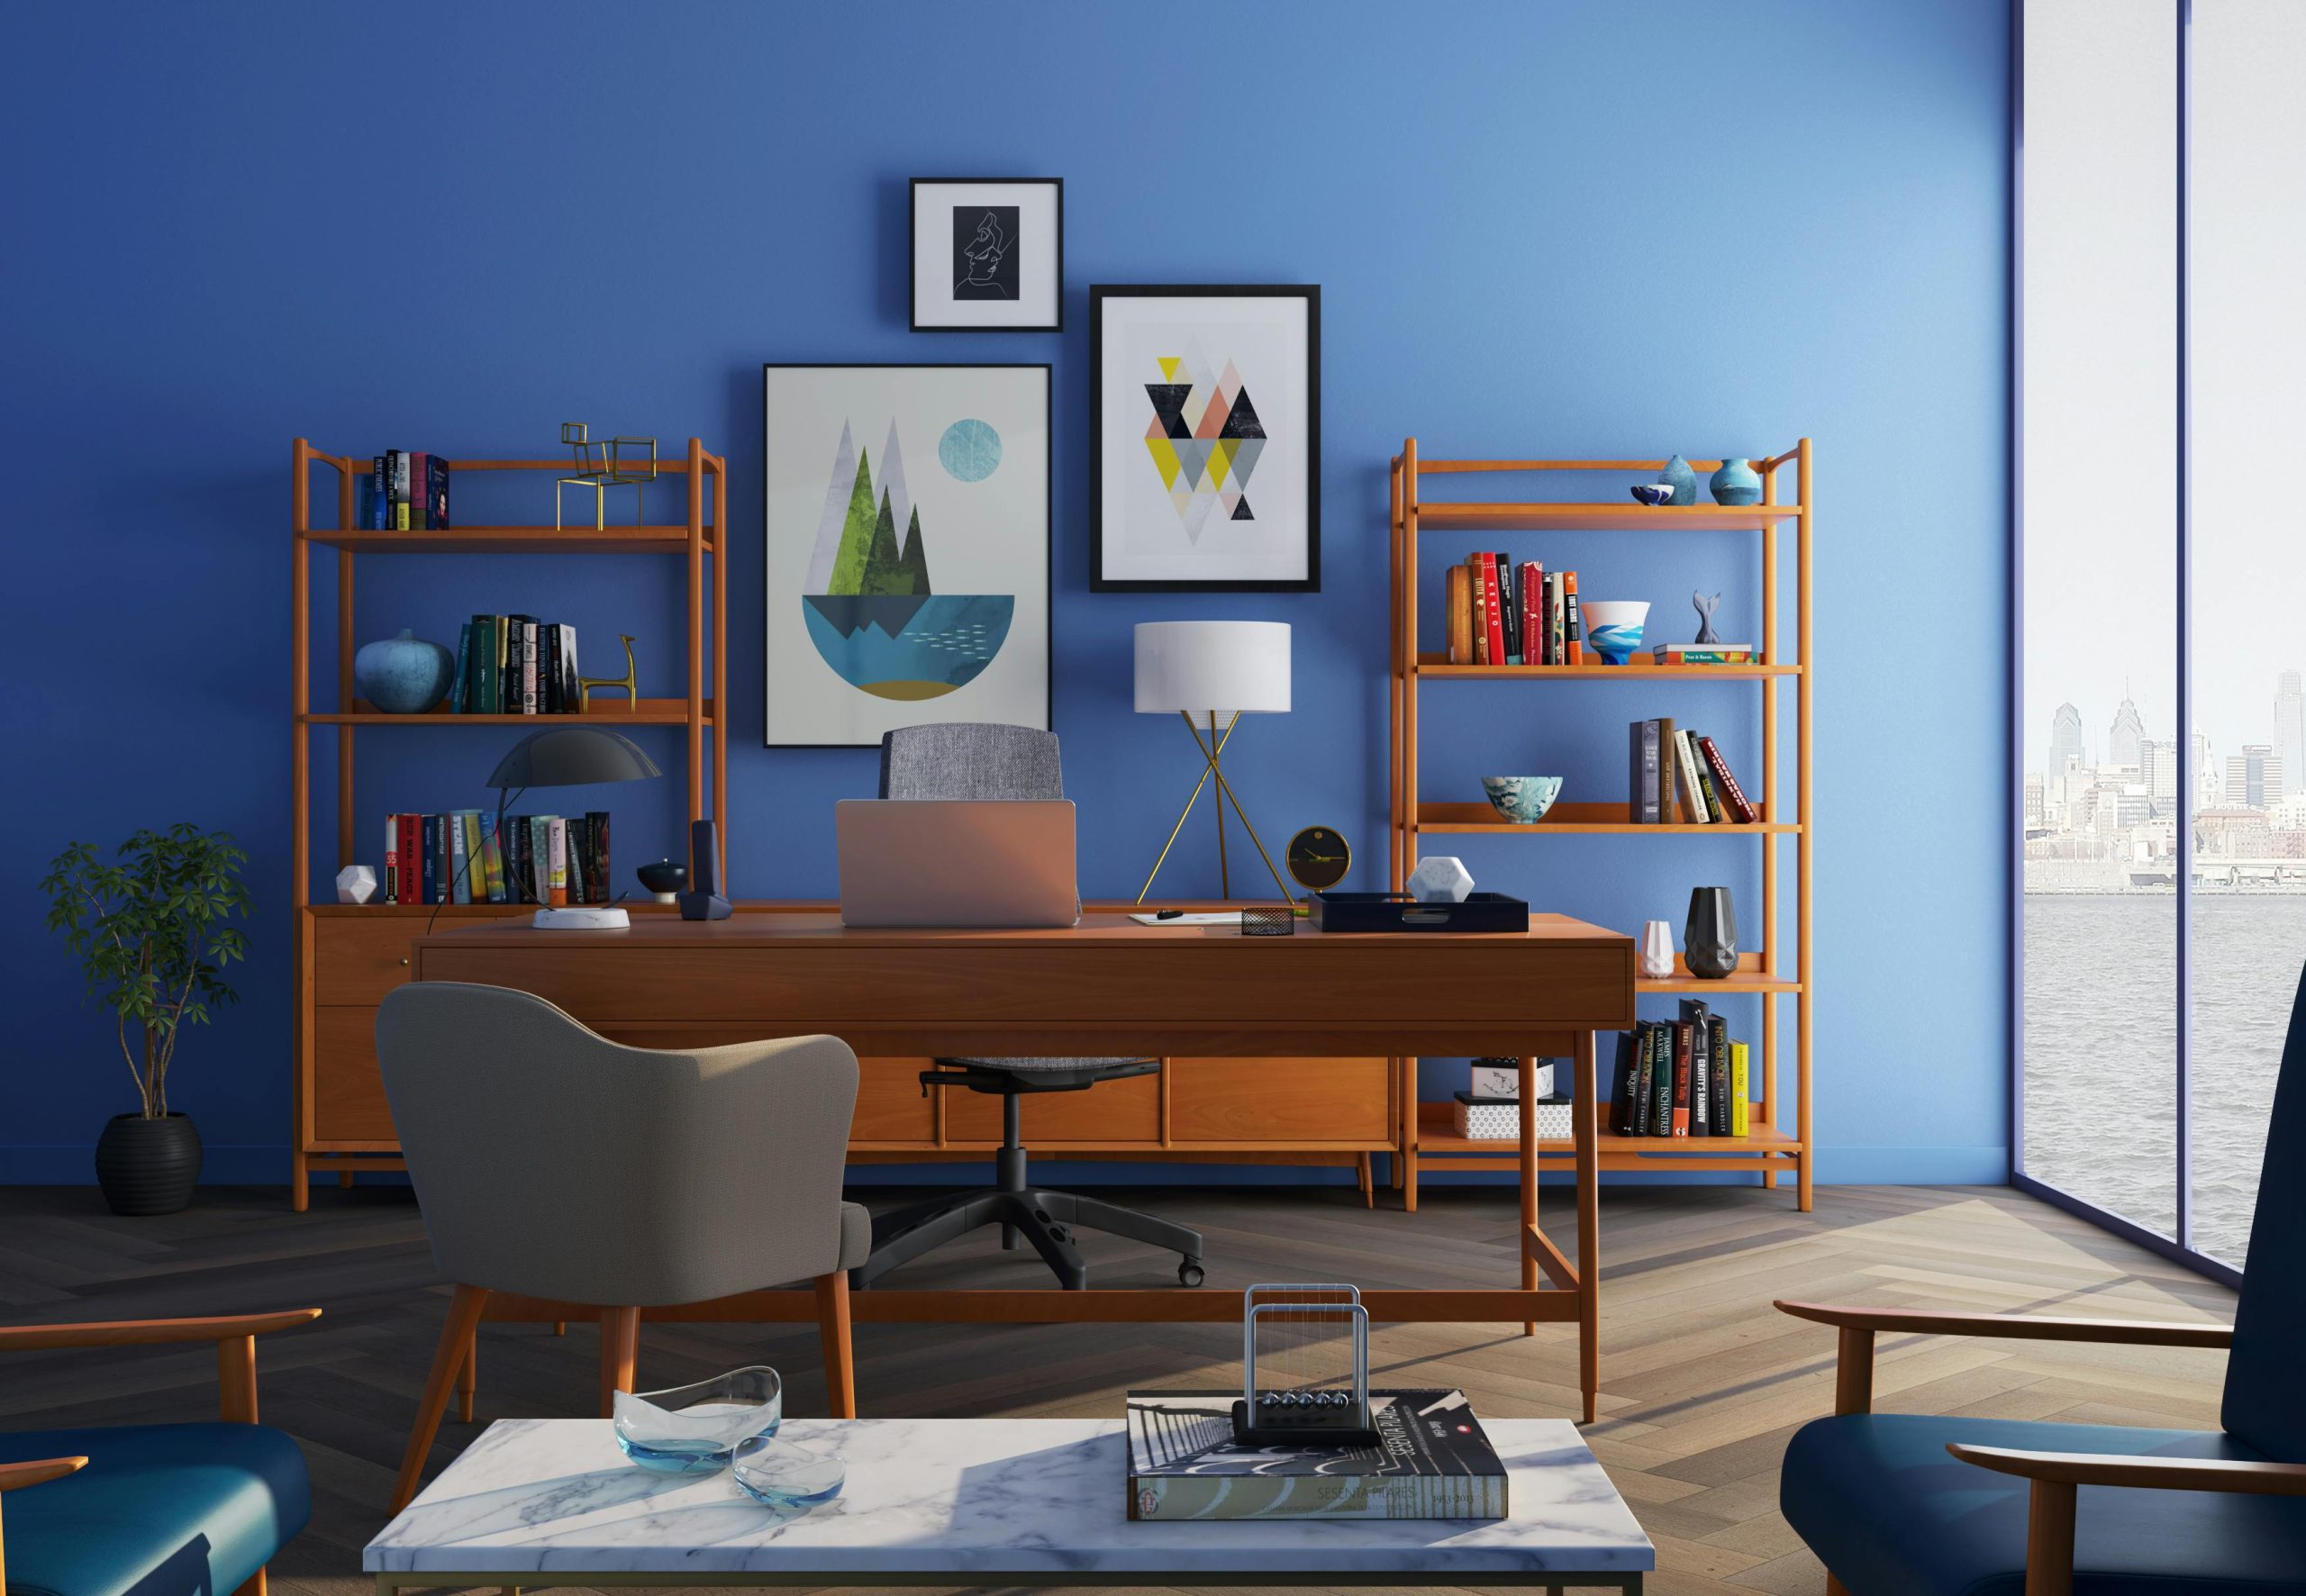 Here’s How to Make Your Home Office Like a Real Office for Less Money Than You Think